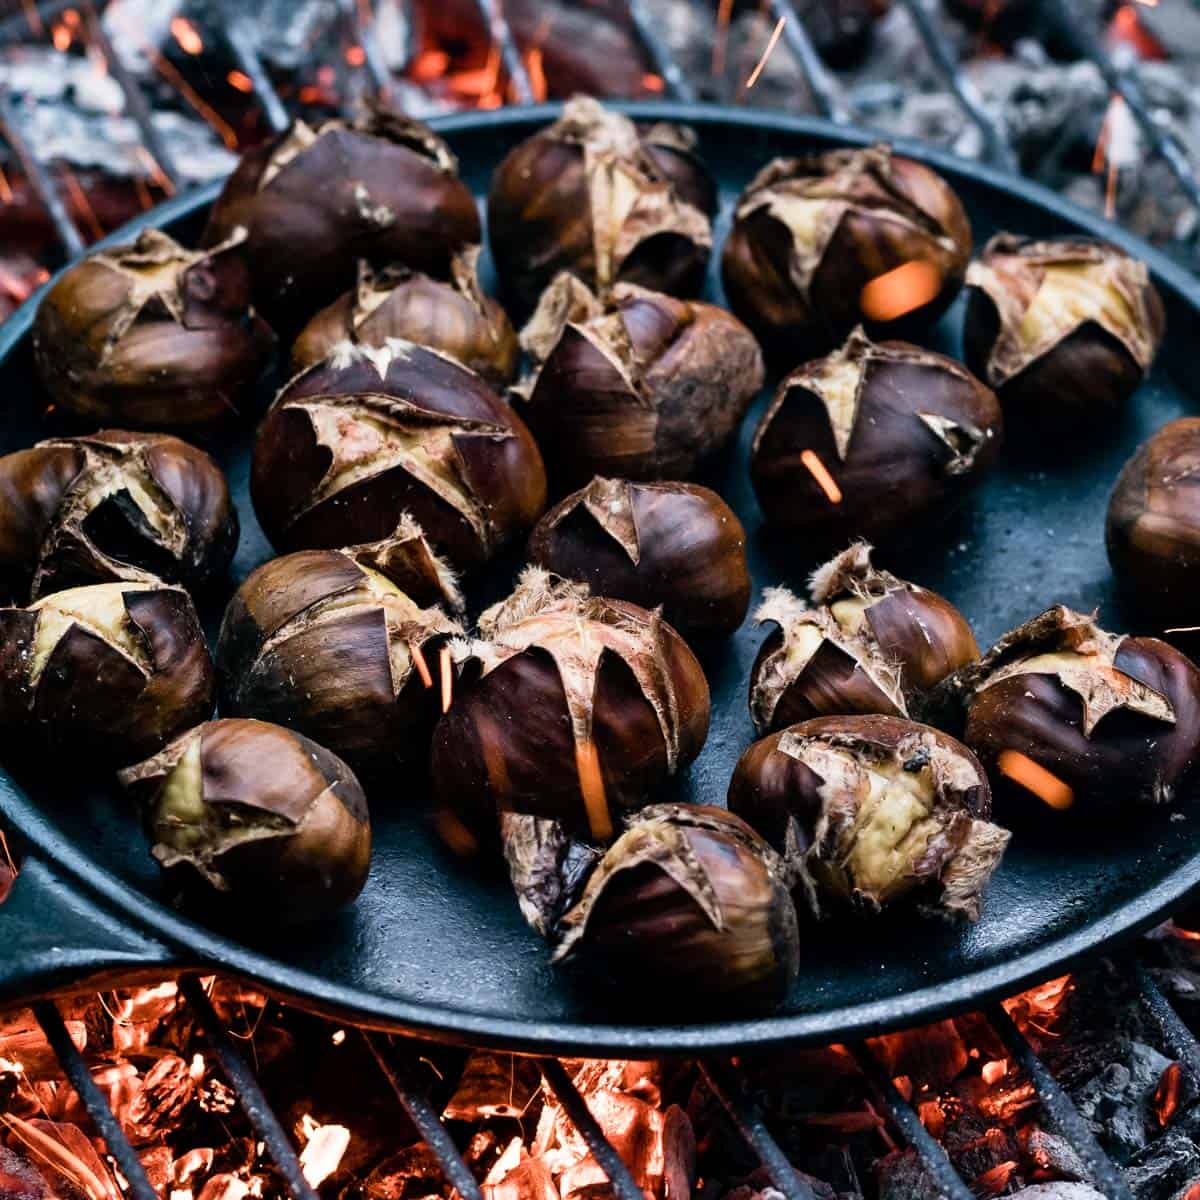 How To Store Roasted Chestnuts